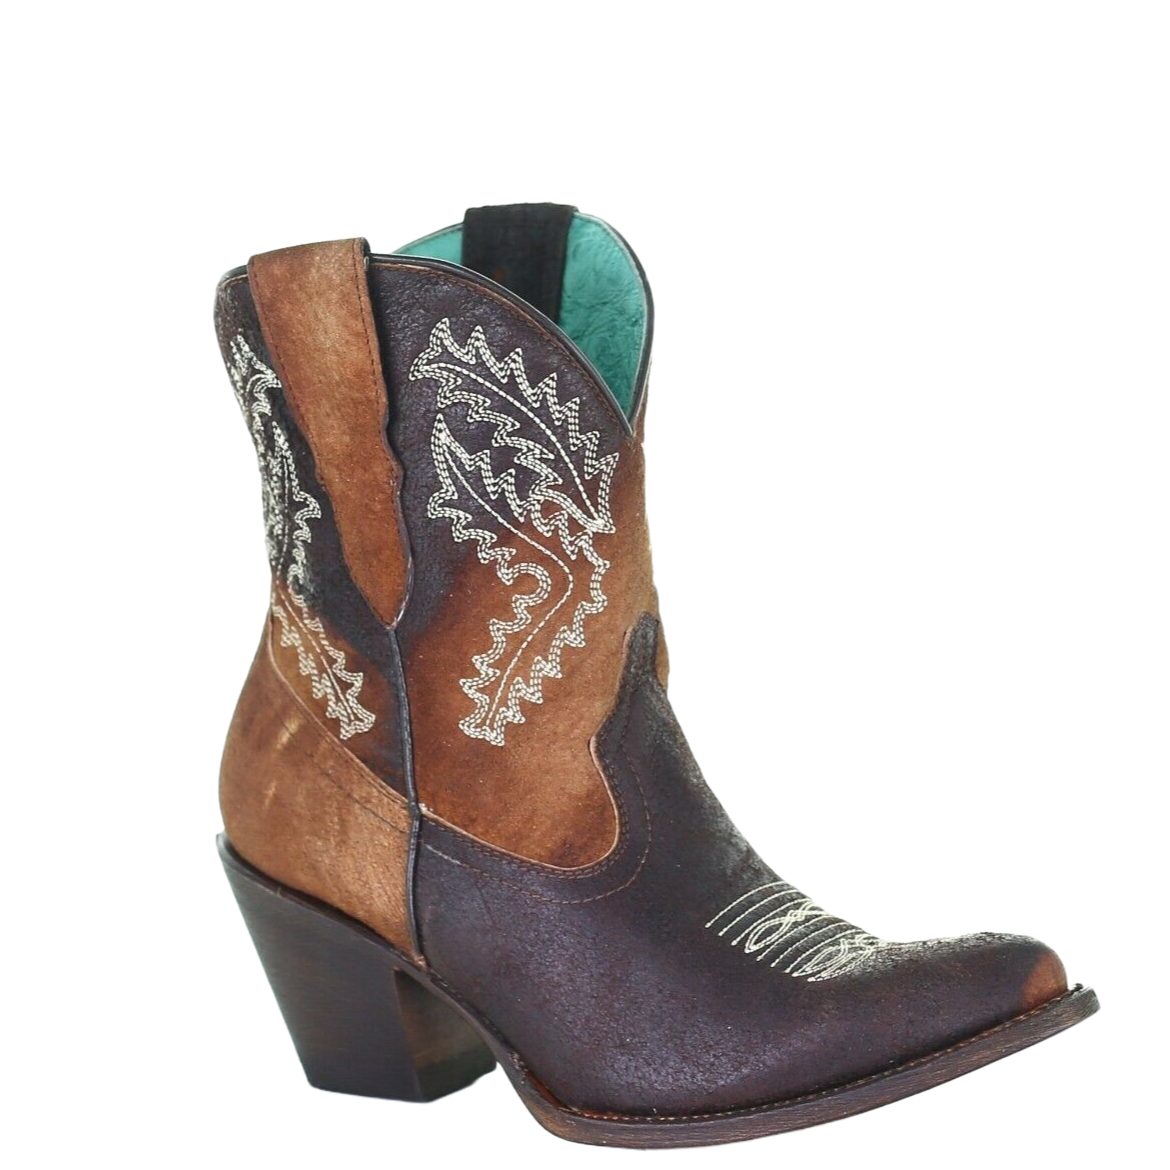 Corral Ladies Chocolate and Tan Shadow Ankle Boot w/ Western Embroidery E1651